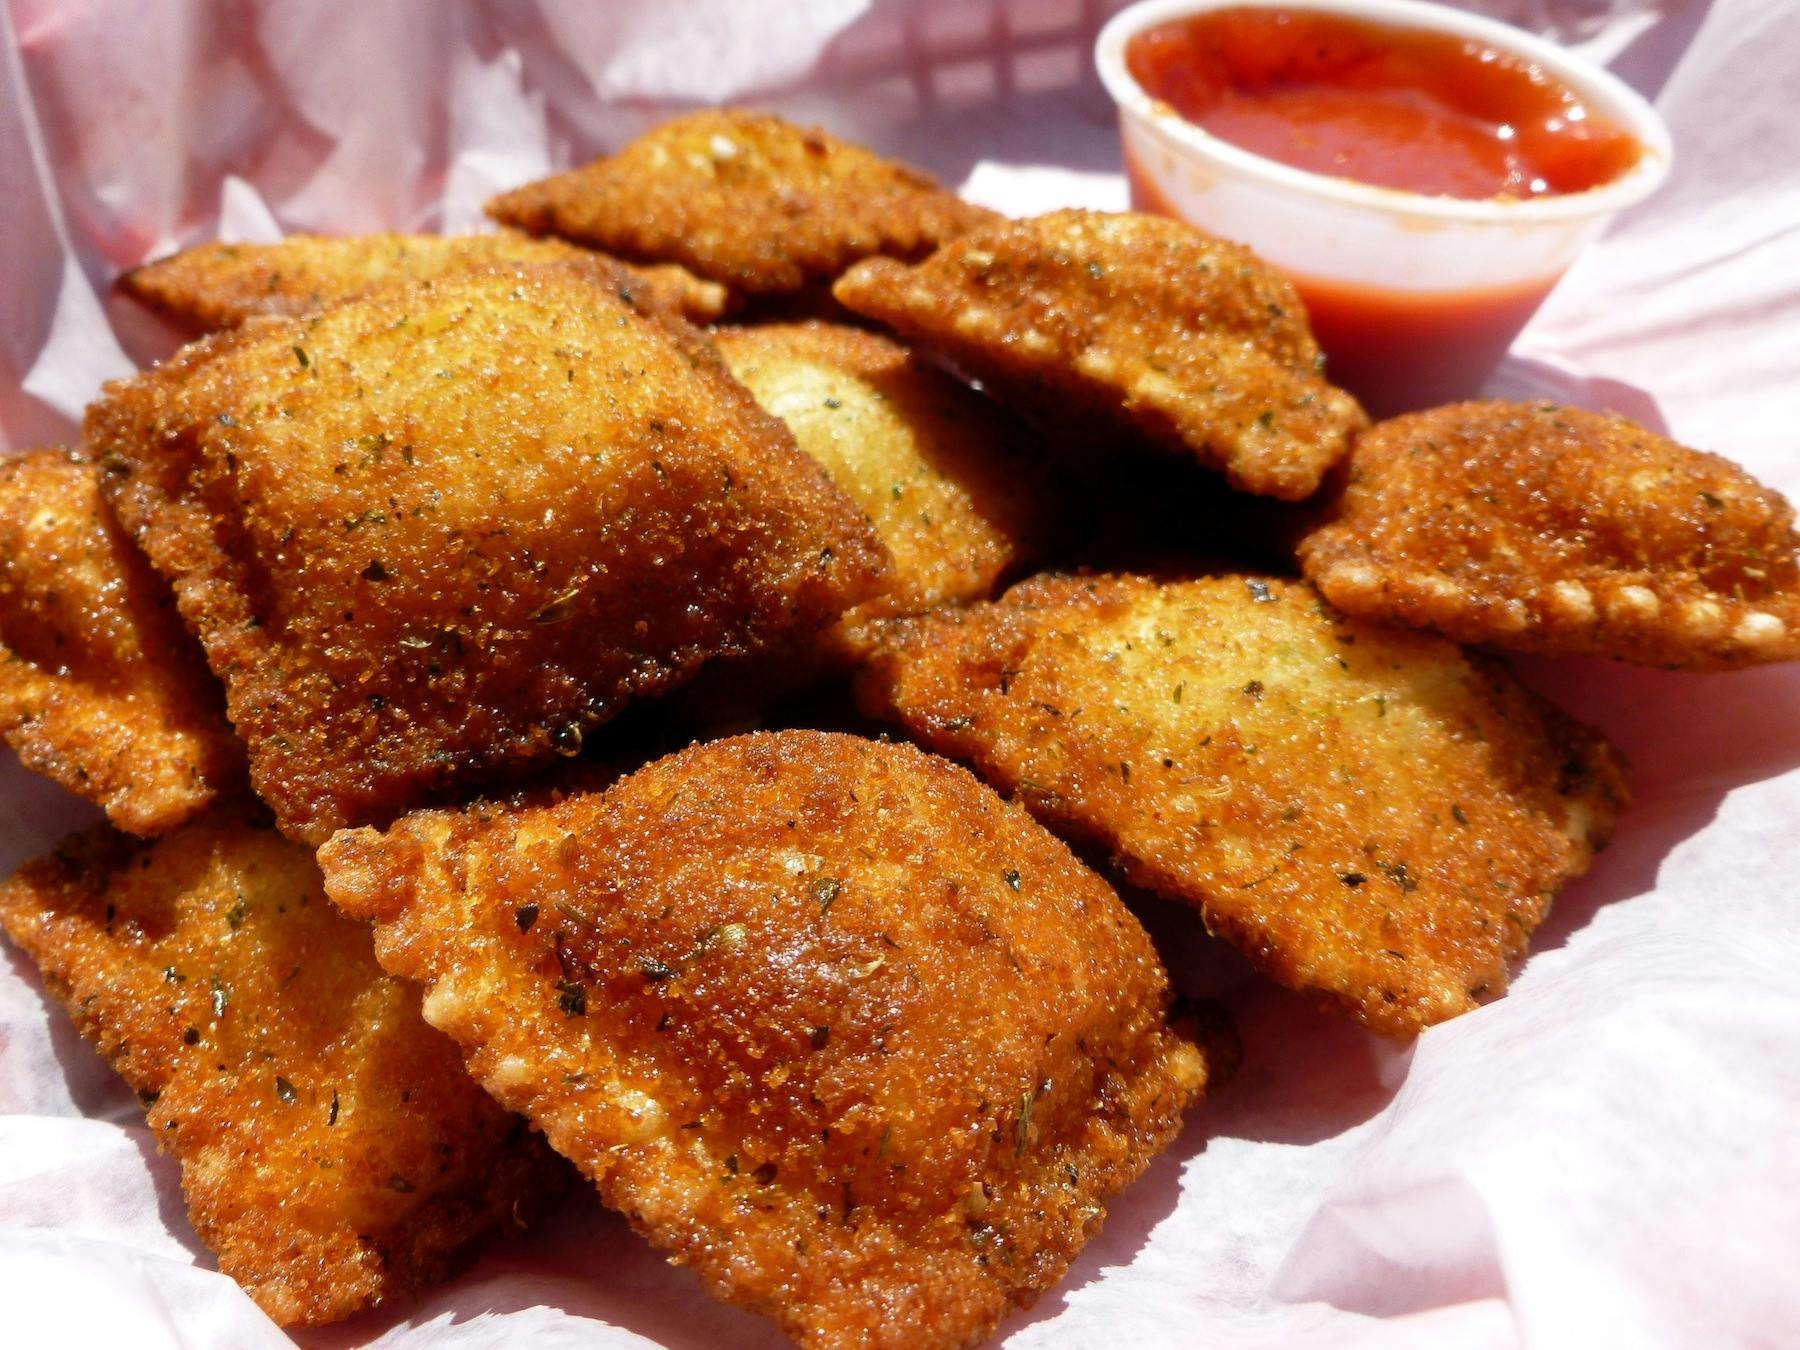 Fried Breaded Cheese Ravioli from Pizza Shuttle in Milwaukee, WI